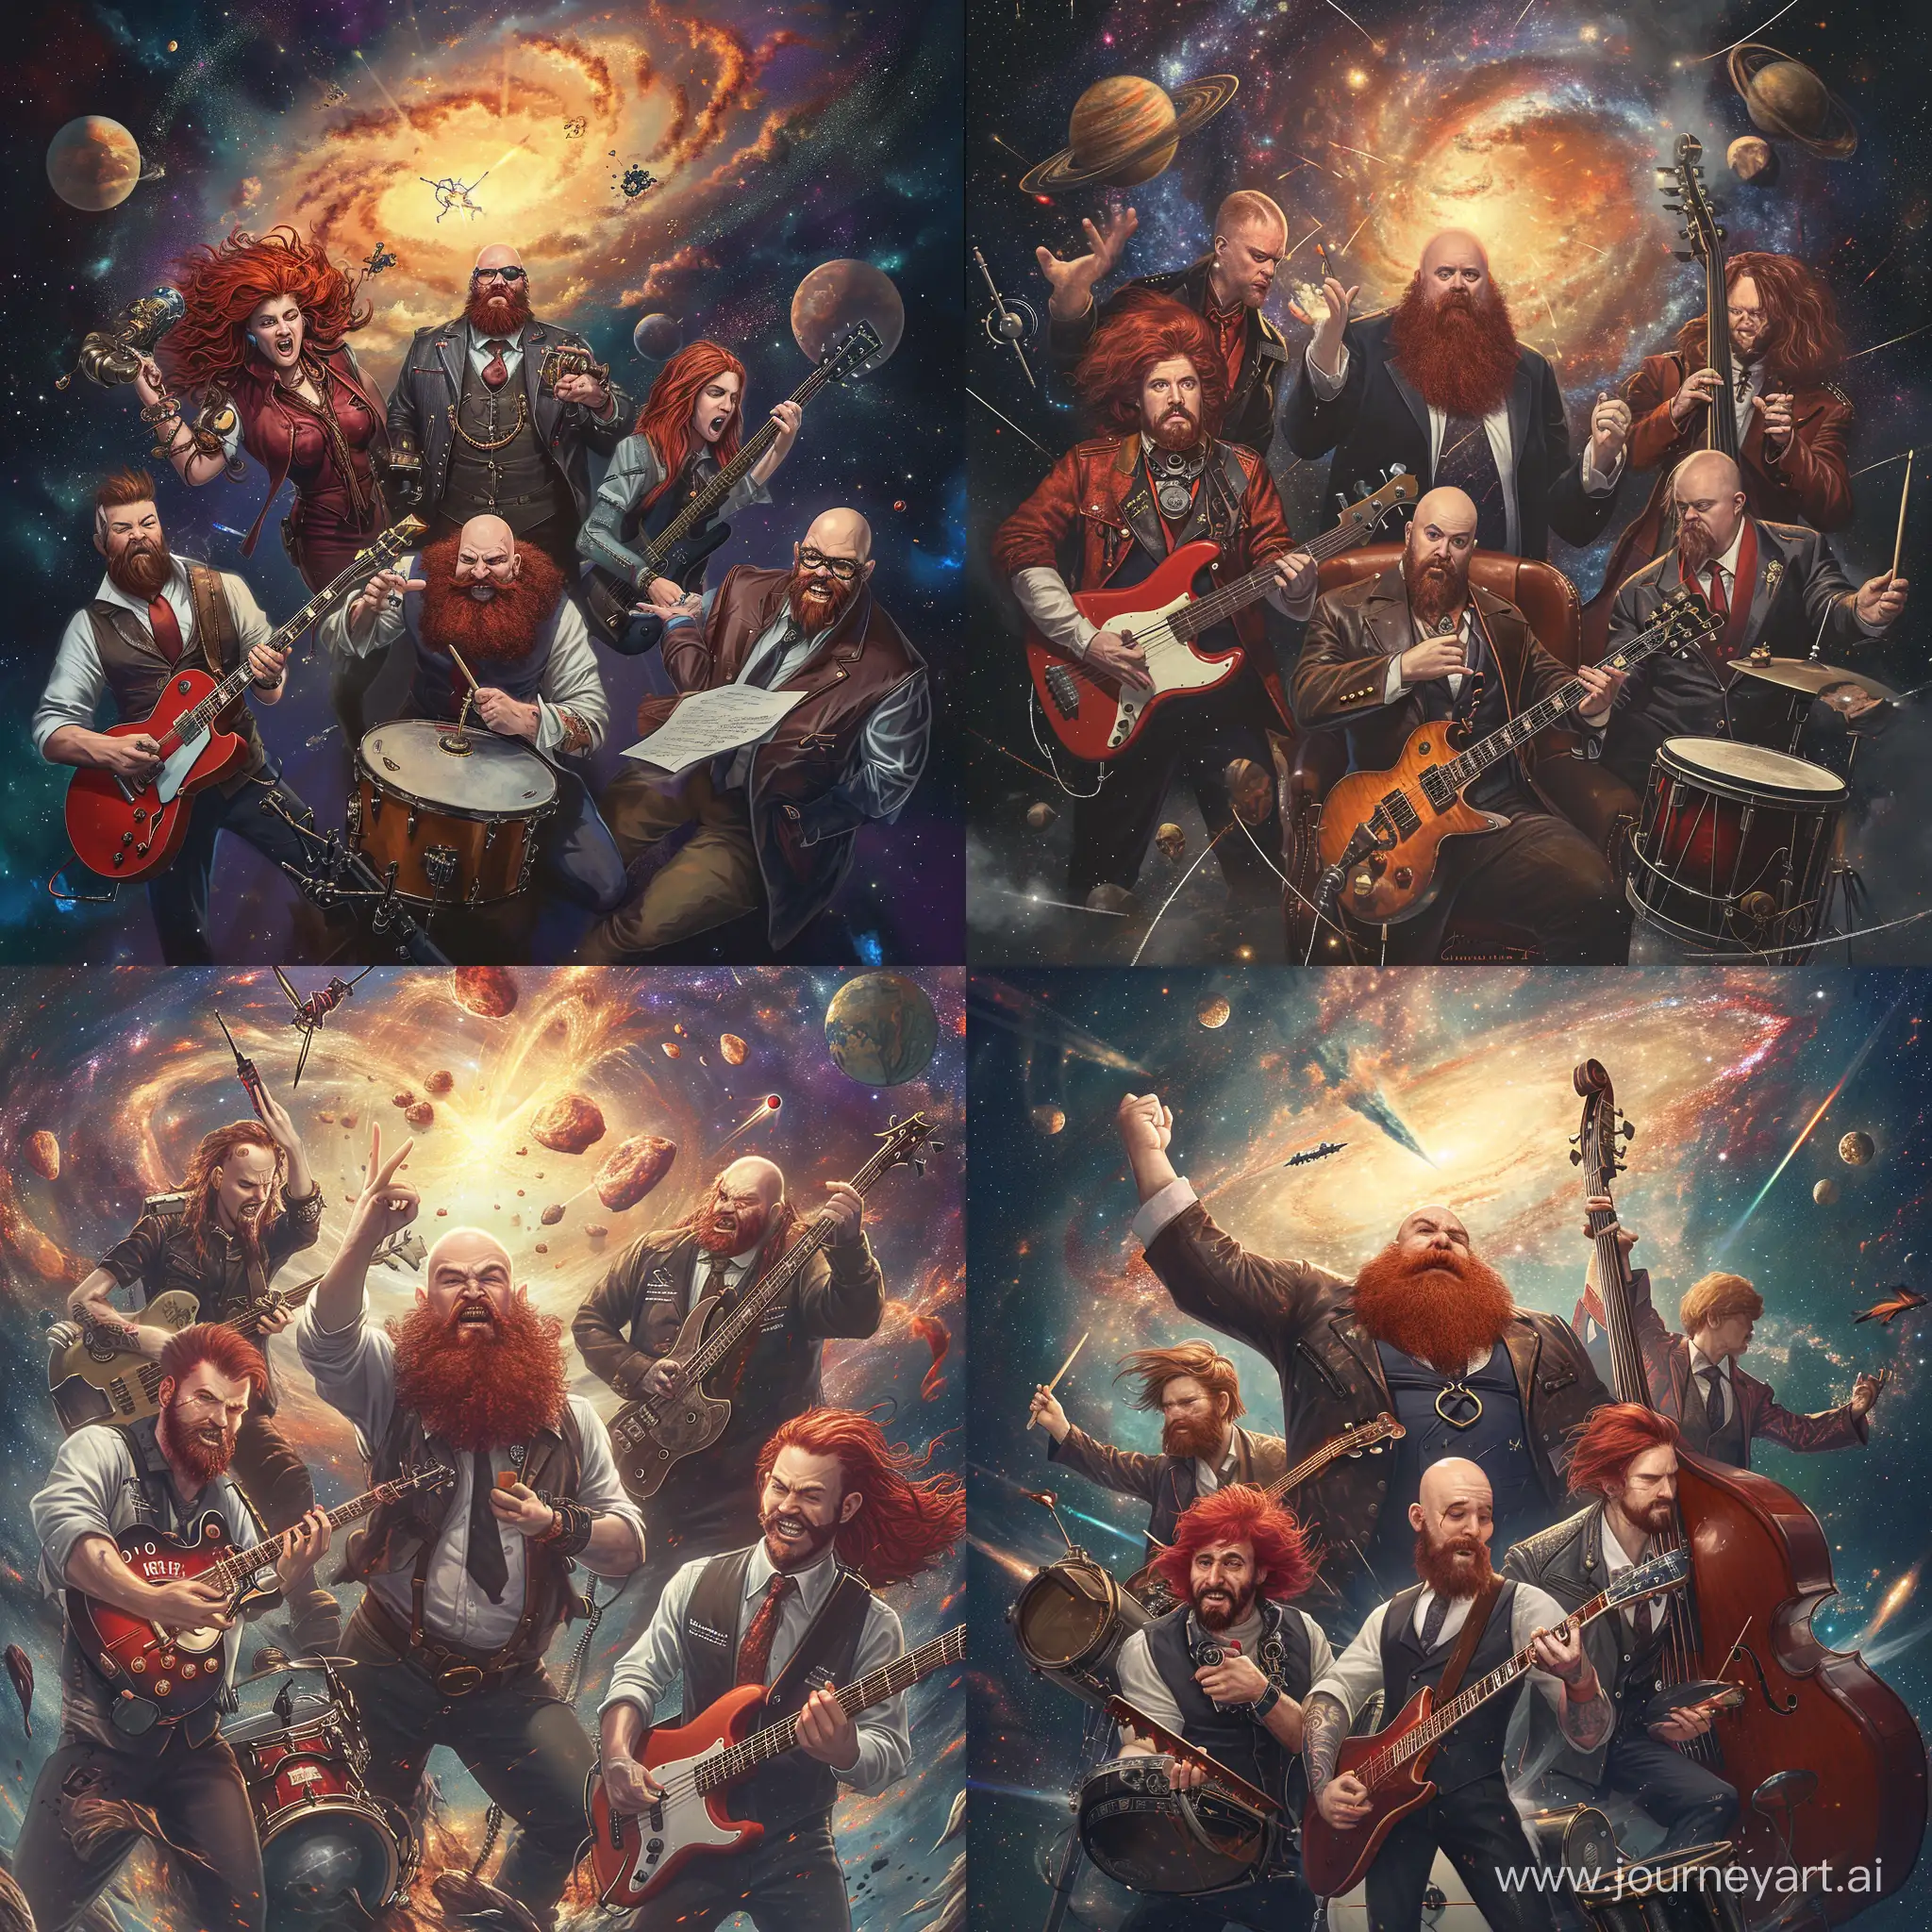 Promo picture of a steam punk cyber space rock band consisting of five guys: red headed guitarst and singer, very big bearded brown haired bassist, bald guitarist without a beard, longhaired drummer with red hair and a big random guy with leather tie and suit making notes. They can be standing in galaxy in the middle of supernova explosion